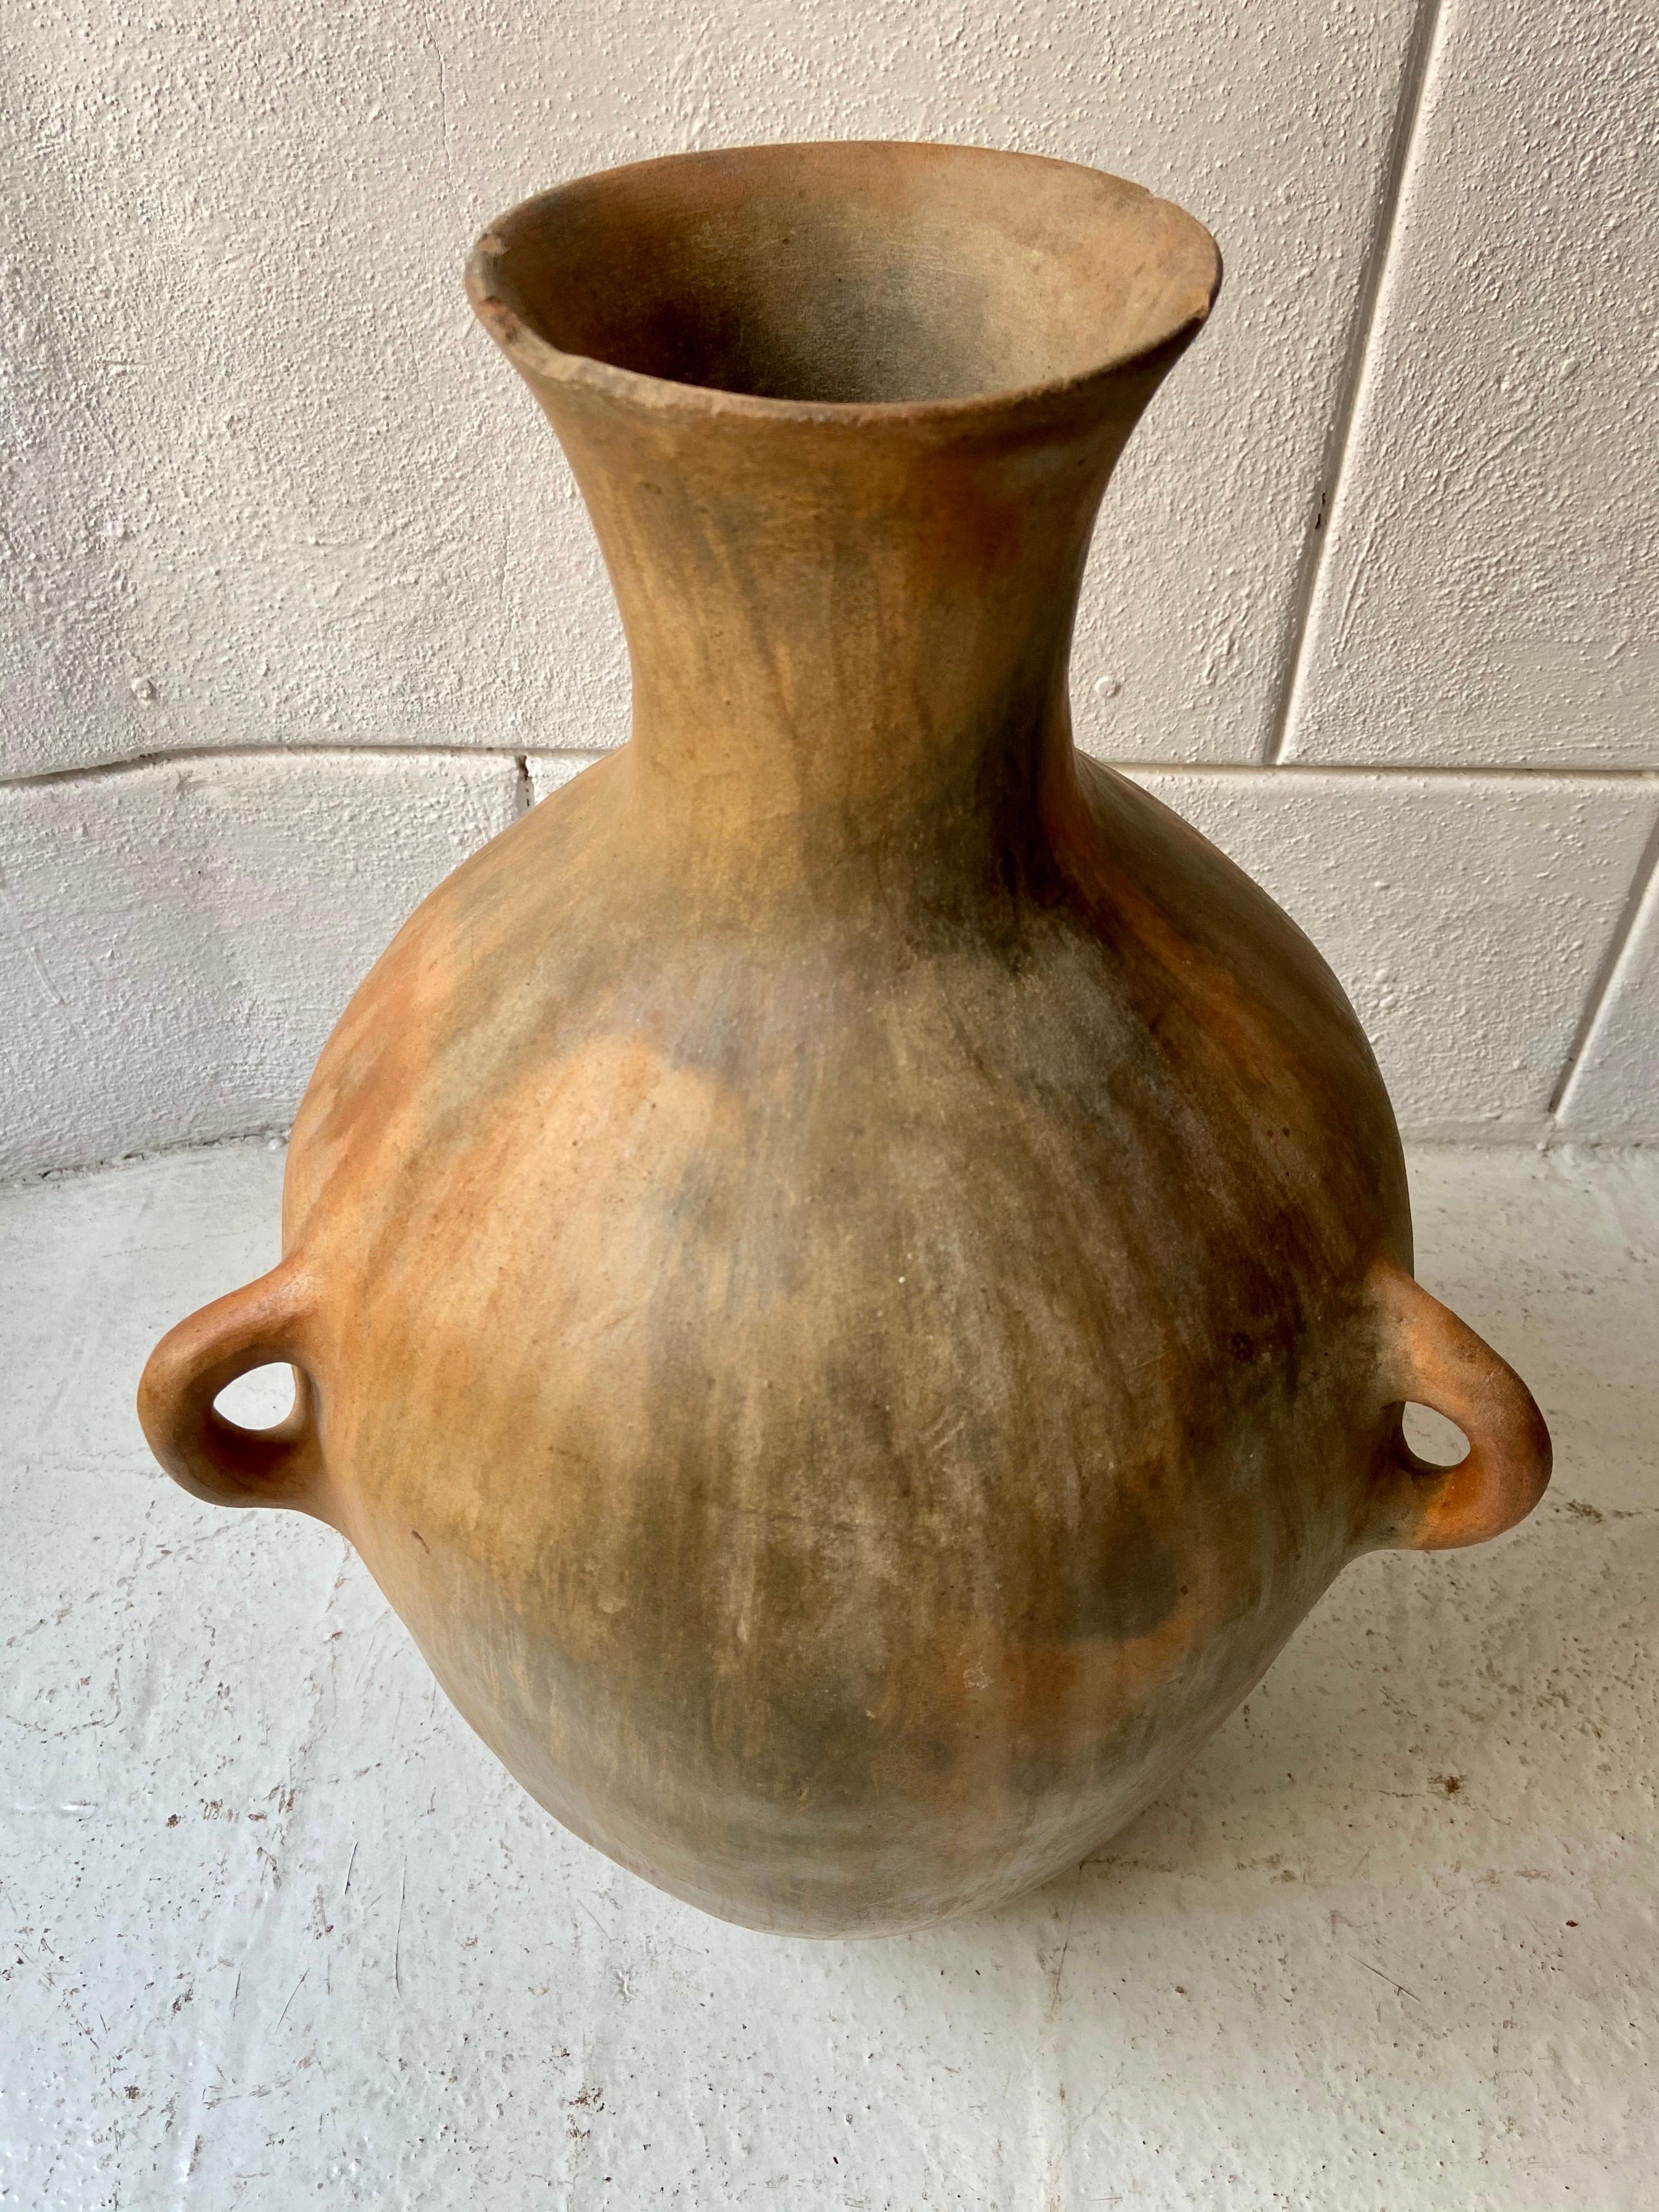 Ceramic water pot from the Northern Mountains of Puebla, circa 1960s. Vessel has 3 small handles (all intact) used for rope ties for transport purposes. This type of clay in particular tends to keep the water cool.